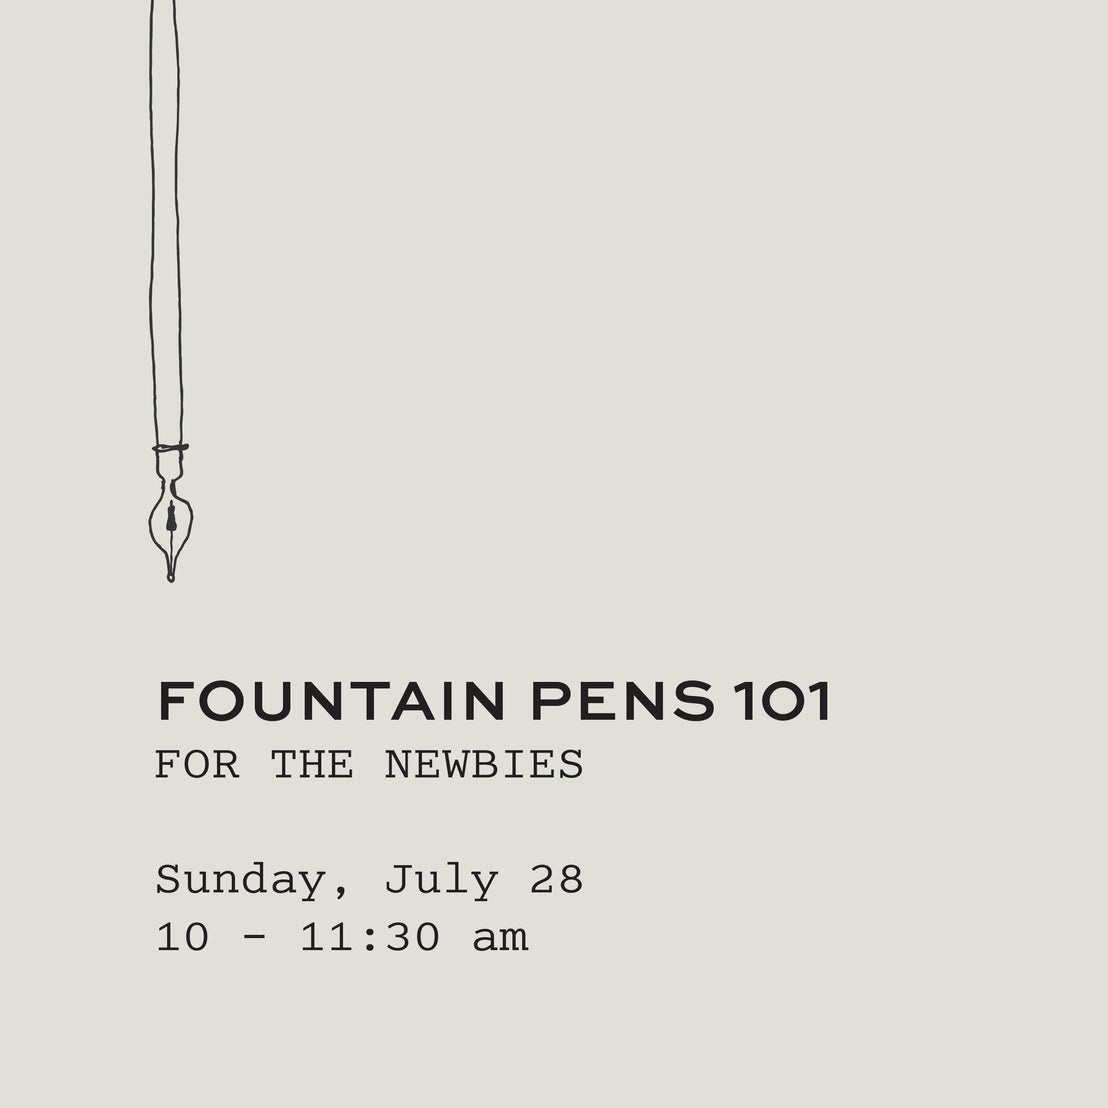 Fountain Pens 101: A Meet-up for the Newbies